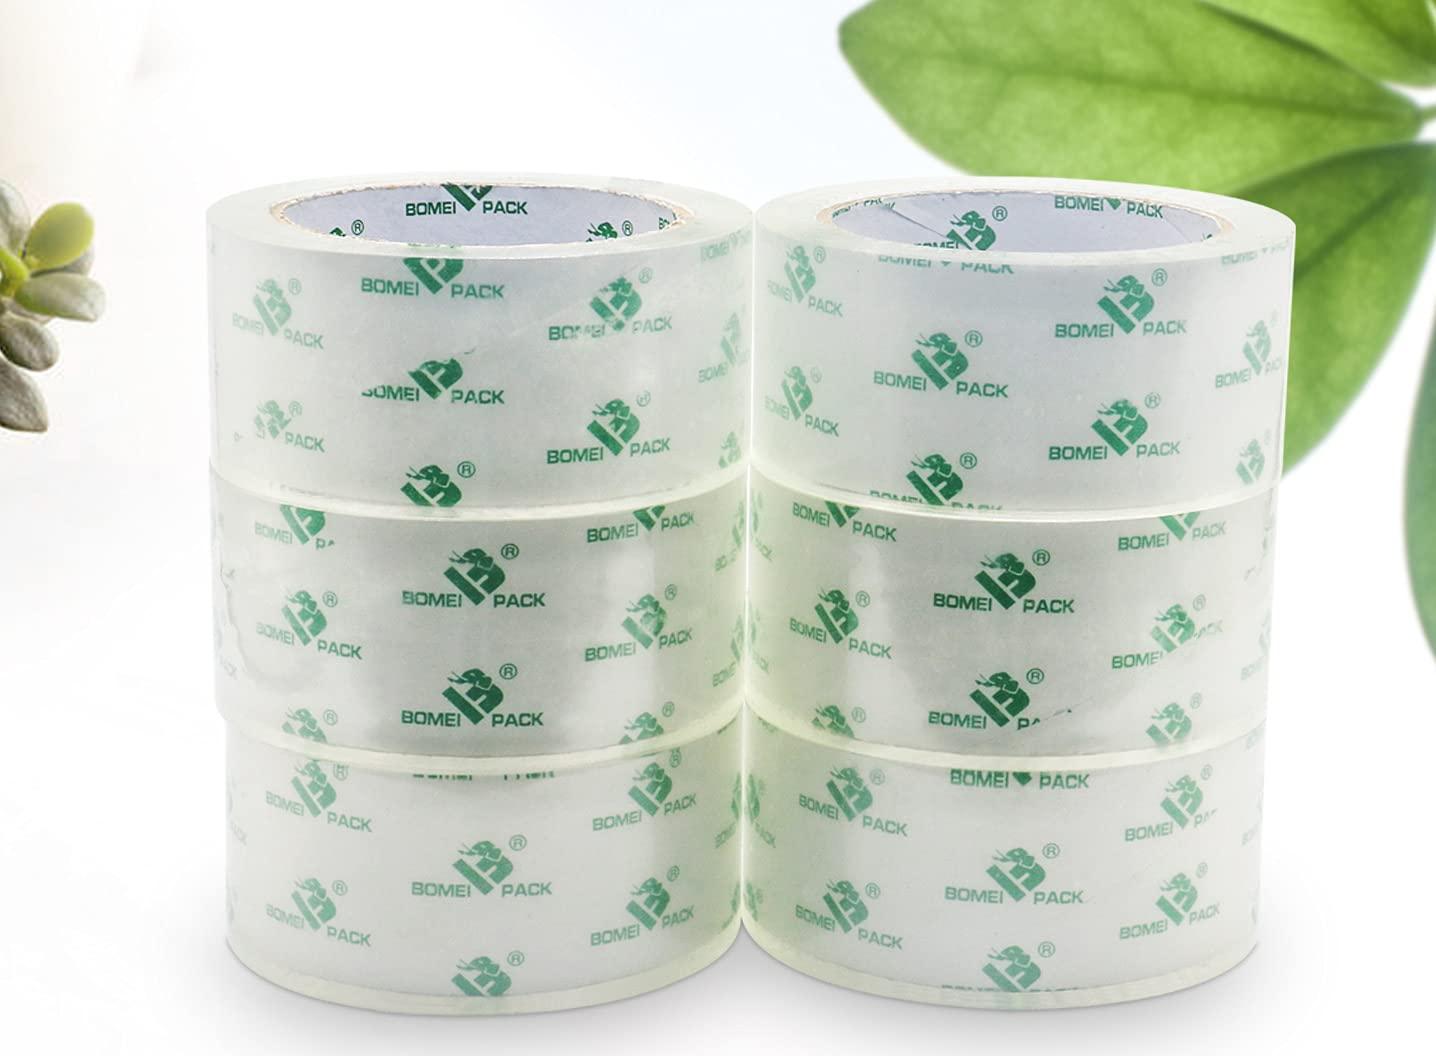 bomei pack packing tape super clear shipping tape 1 88 inch x 50m 6 rolls  bomei b07fkycmyf